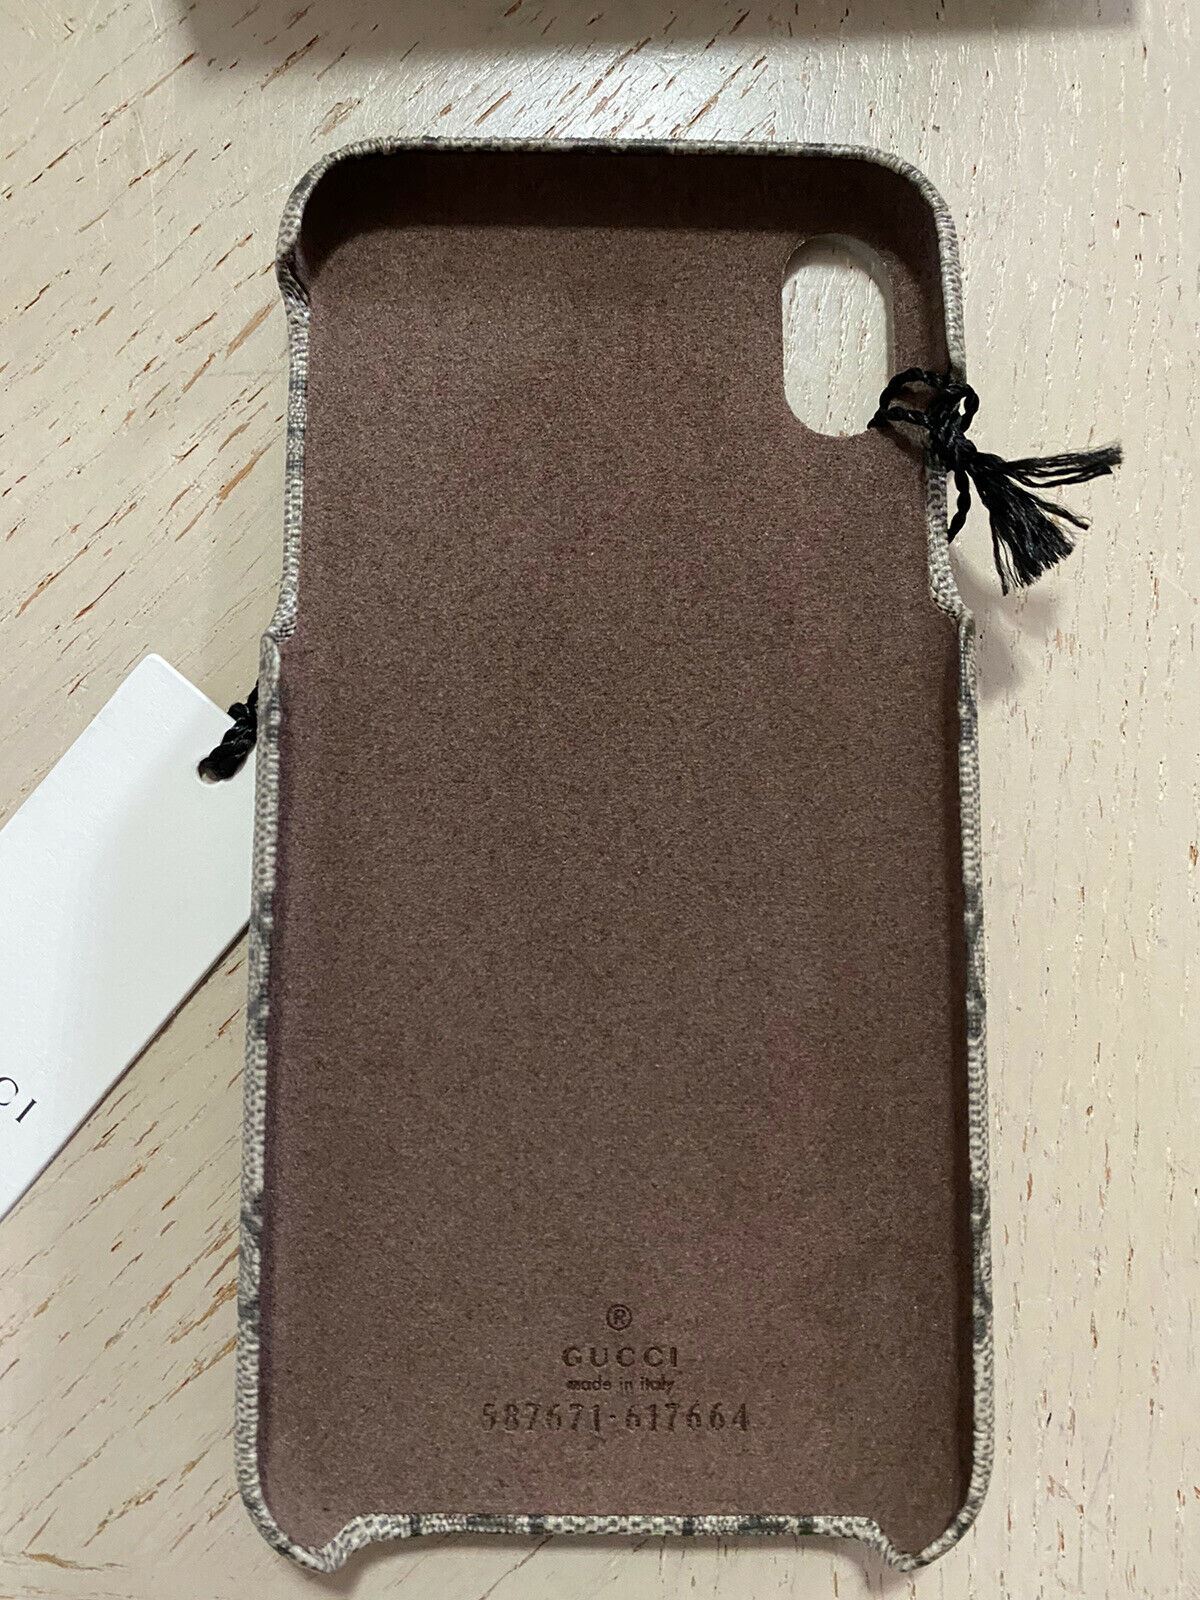 New $640 Gucci iPhone XS Max Case GG Monogram Beige Italy